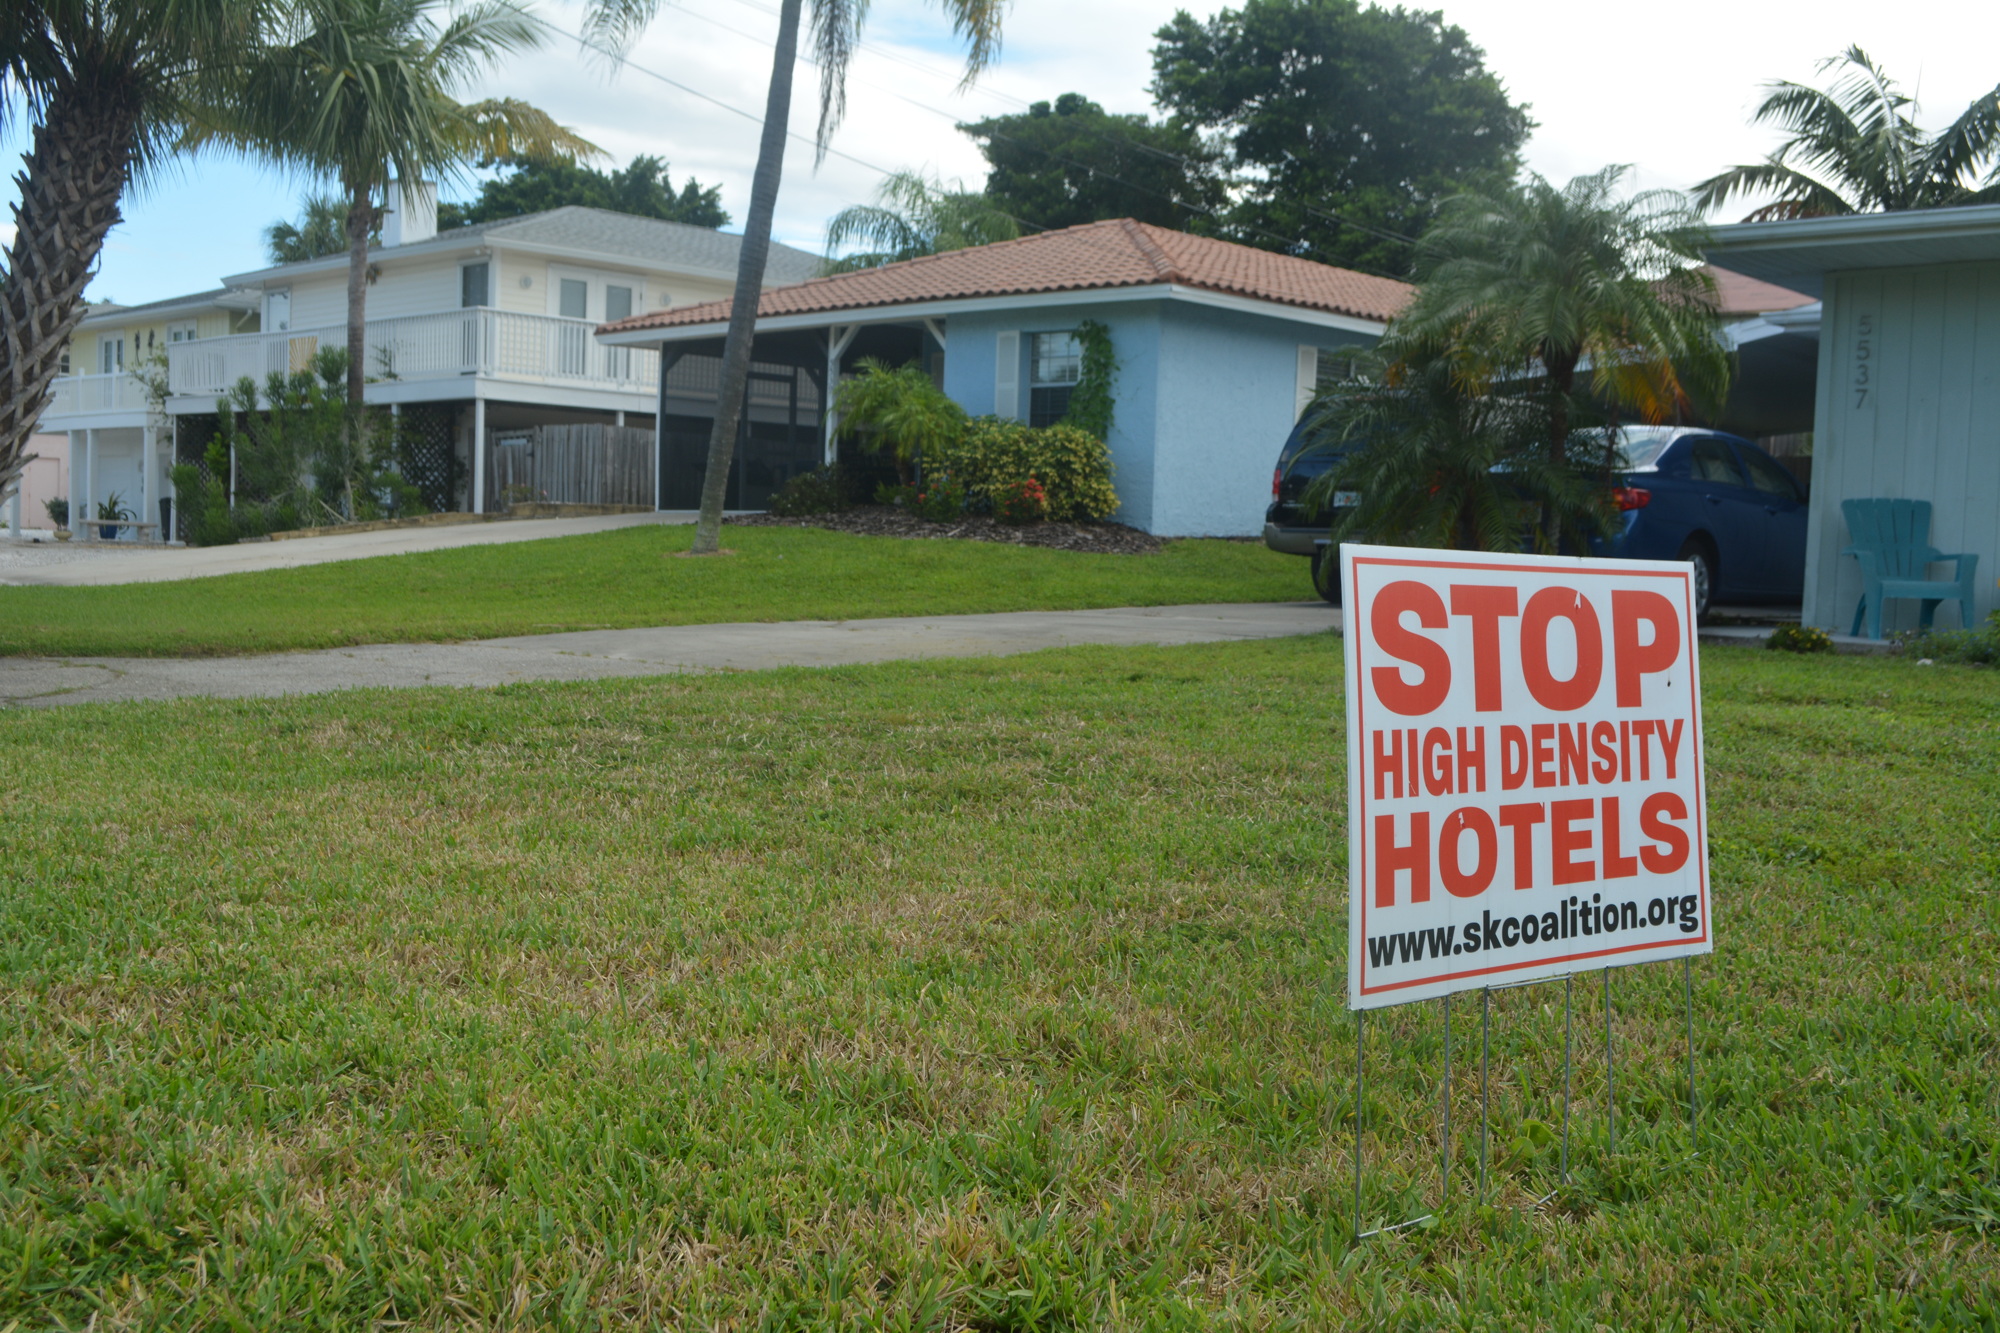 Some yards on Siesta Key bear signs the Siesta Key Coalition produced, advertising residents' opposition to a series of hotel proposals on the island.